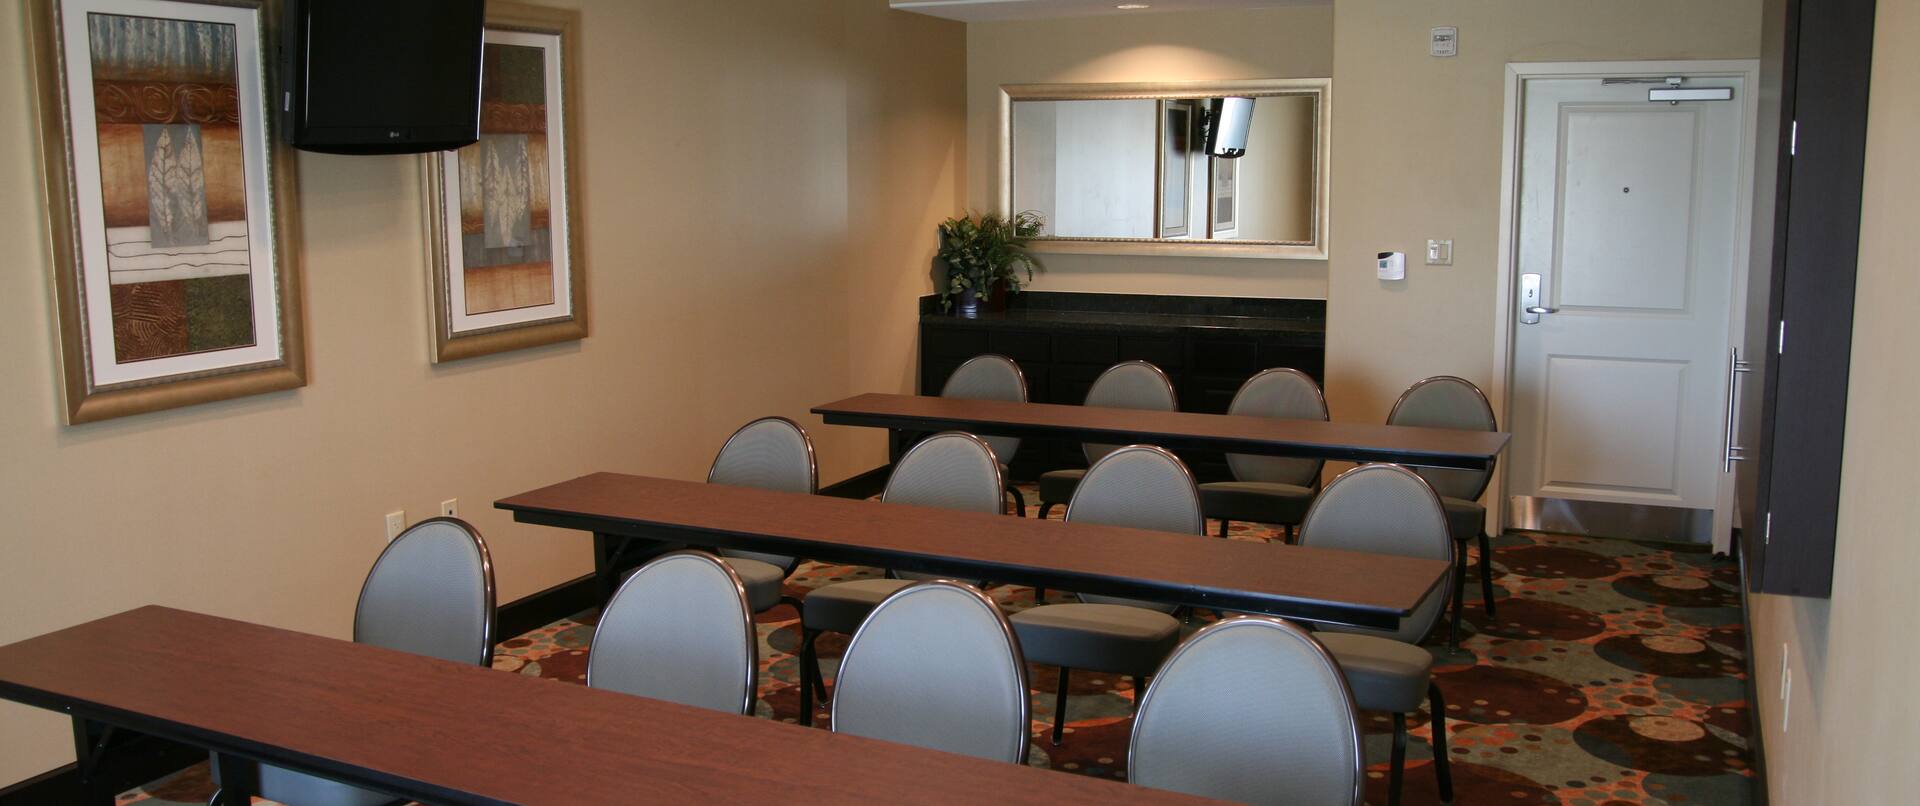 Classroom Setup in Meeting Room With Tables, Chairs, Wall Art, and Entry Door